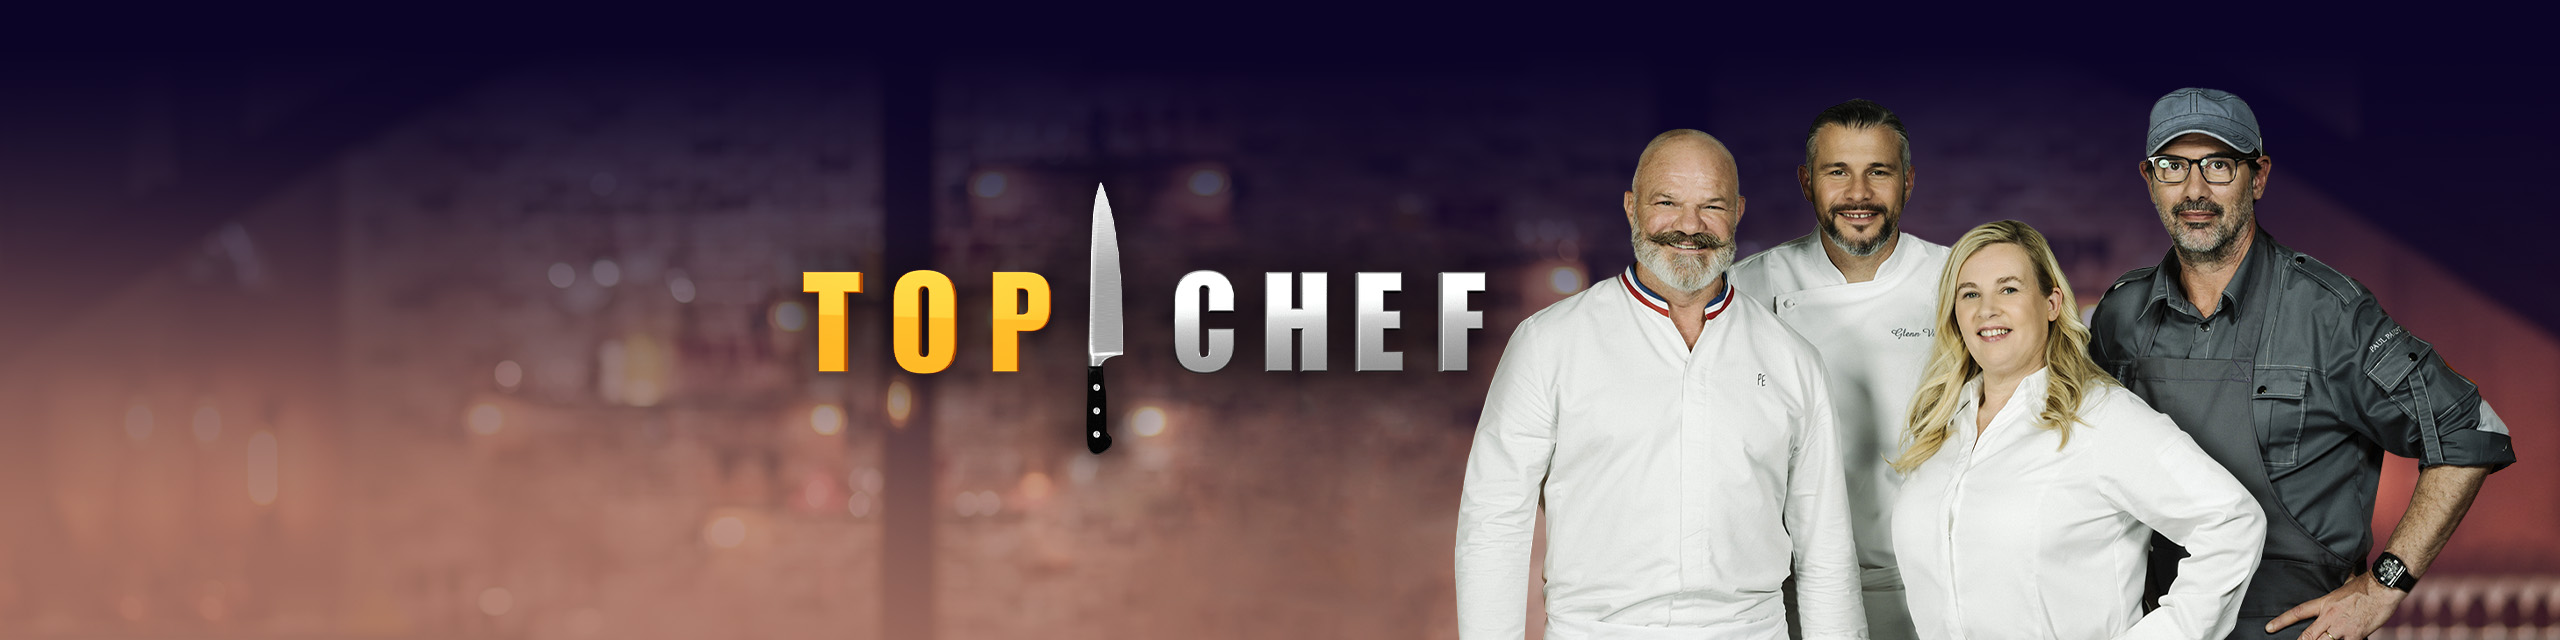 Top chef lame